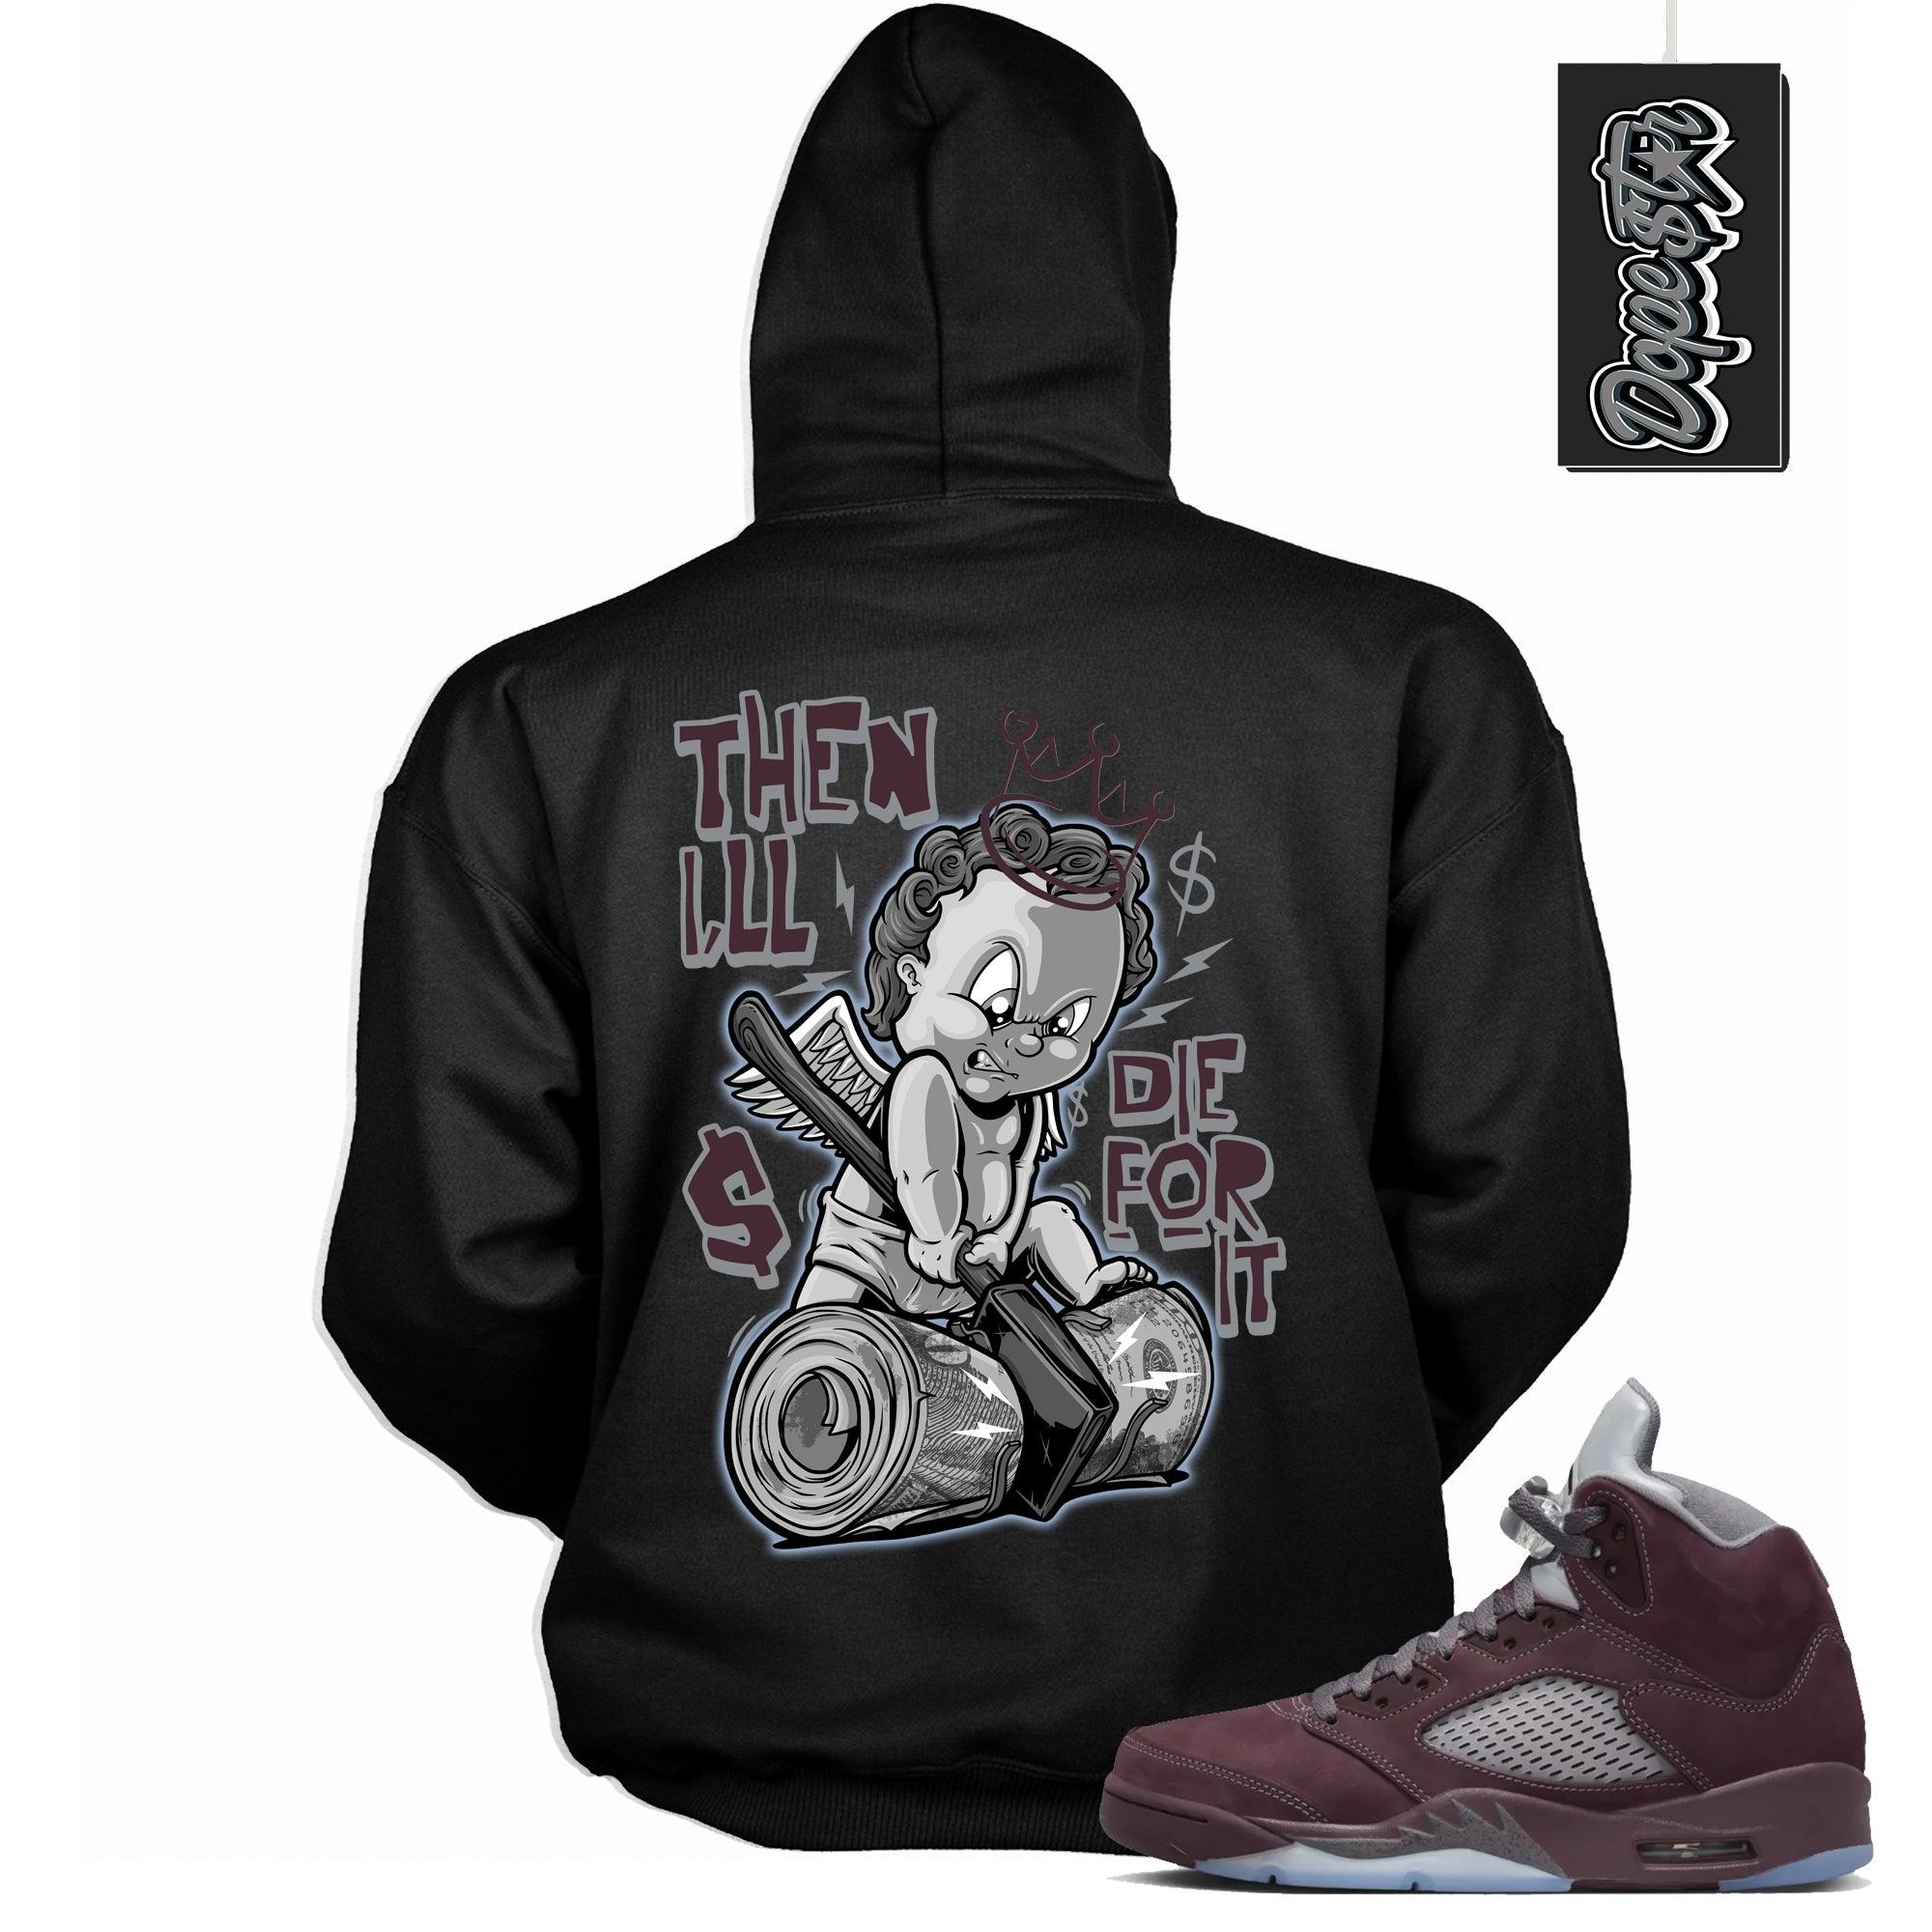 Cool Black Graphic Hoodie with “ Then I’ll 2 “ print, that perfectly matches Air Jordan 5 Burgundy 2023 sneakers